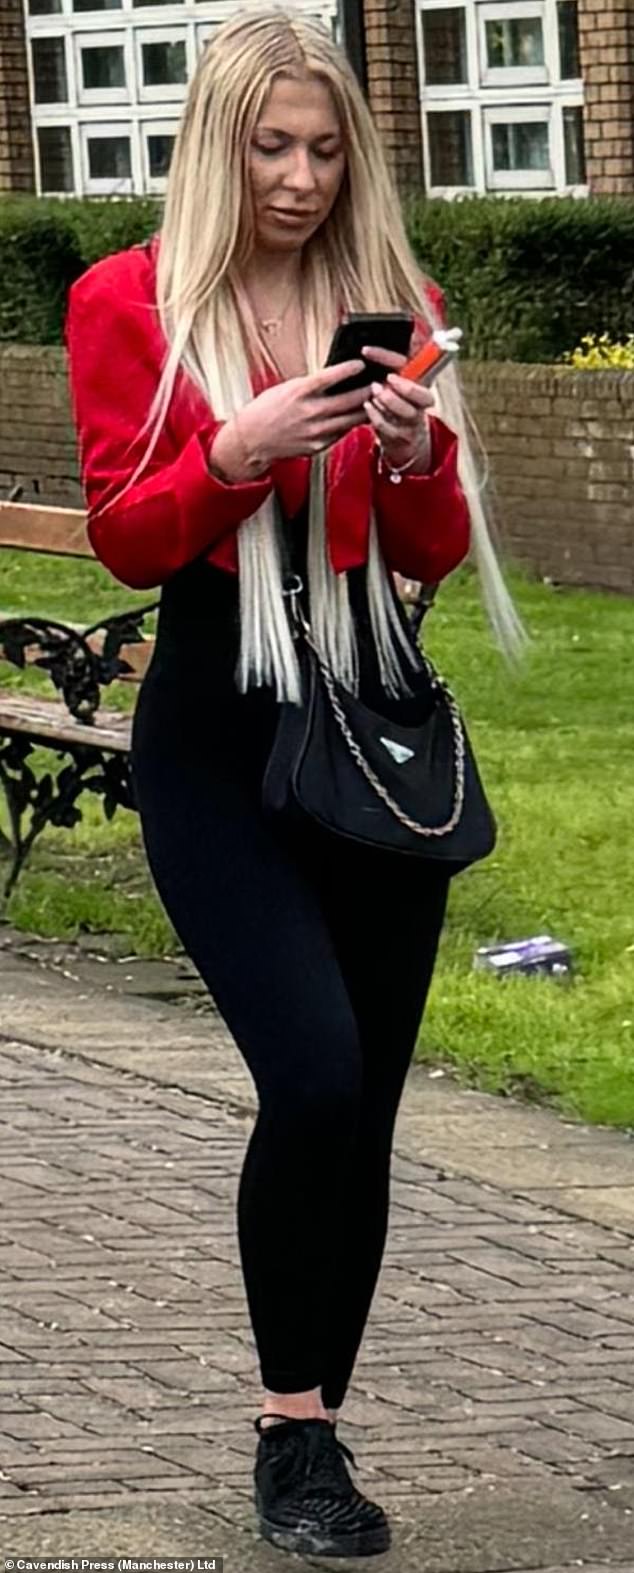 Kozlowska, of Little Stanney, Chester, faced six months in jail under sentencing guidelines after admitting dangerous driving, but was spared jail and given a suspended sentence at Warrington Magistrates' Court after apologize for your behavior.